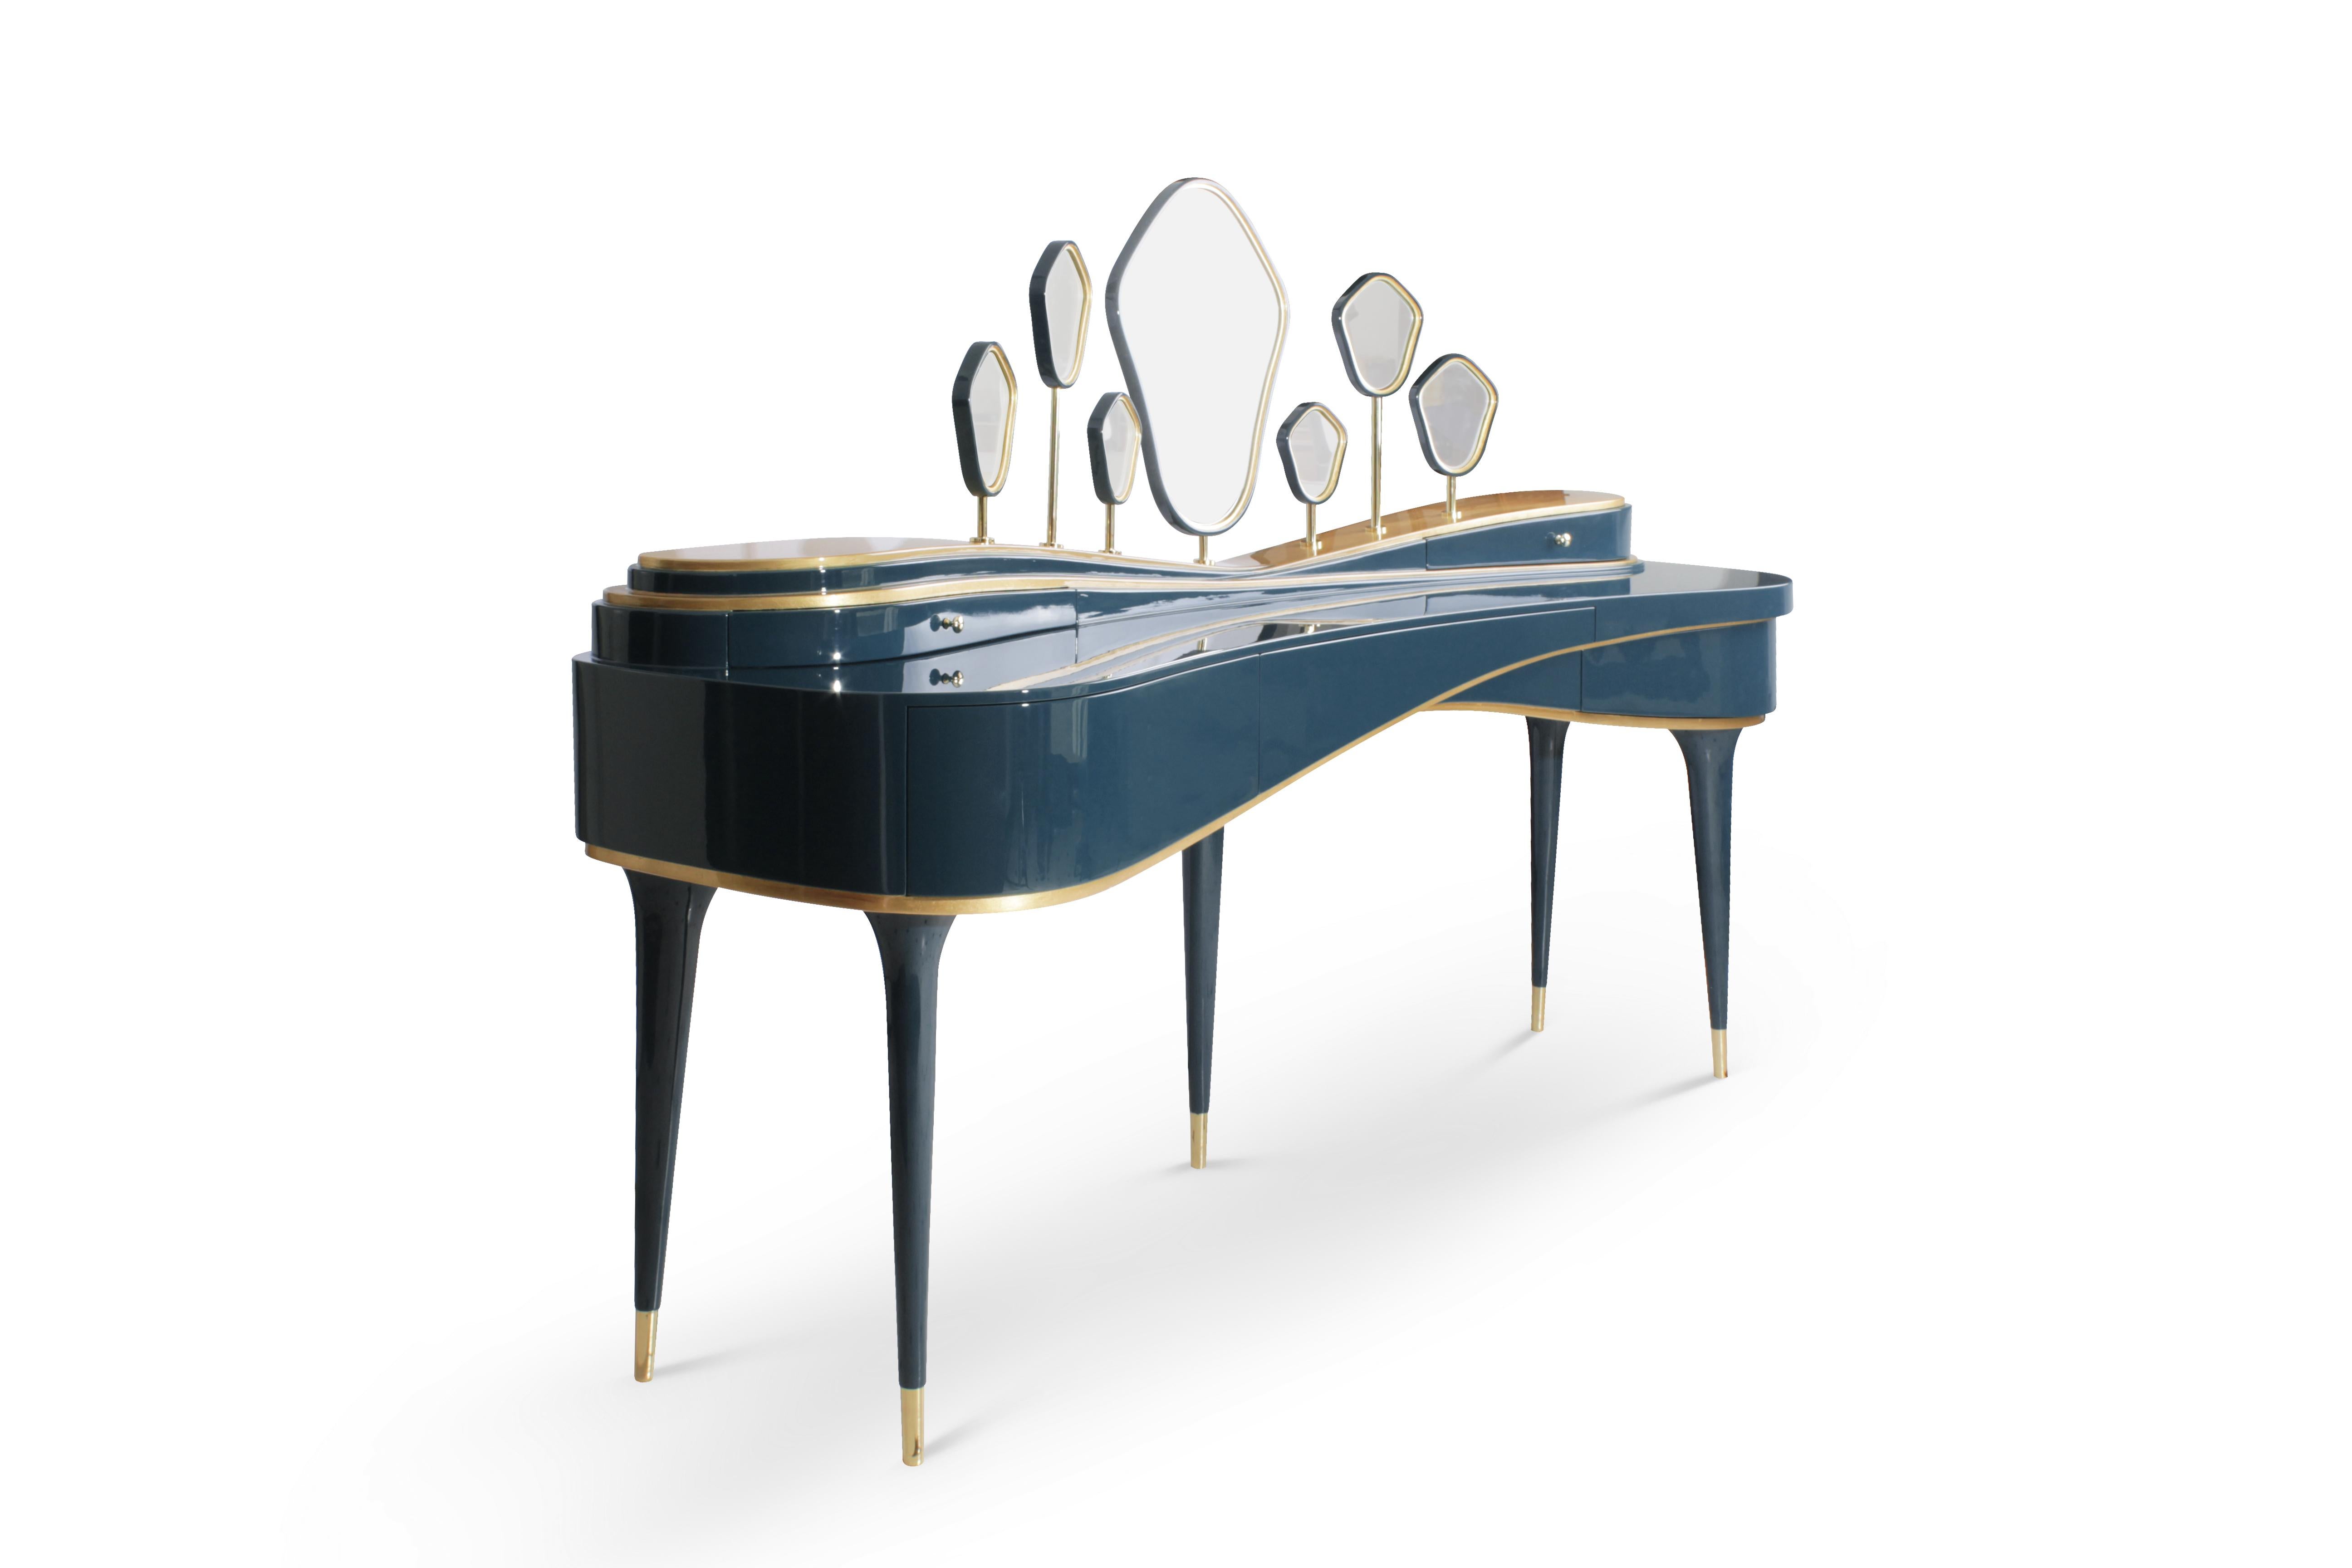 The Amélie dressing table is an expression of mysticism and magic. Inspired by the Pantone Colors of 2017, it presents a blue Niagara lacquered adorned by a brass structure and golden leaf accents. This chabi-chic dressing table is a masterpiece